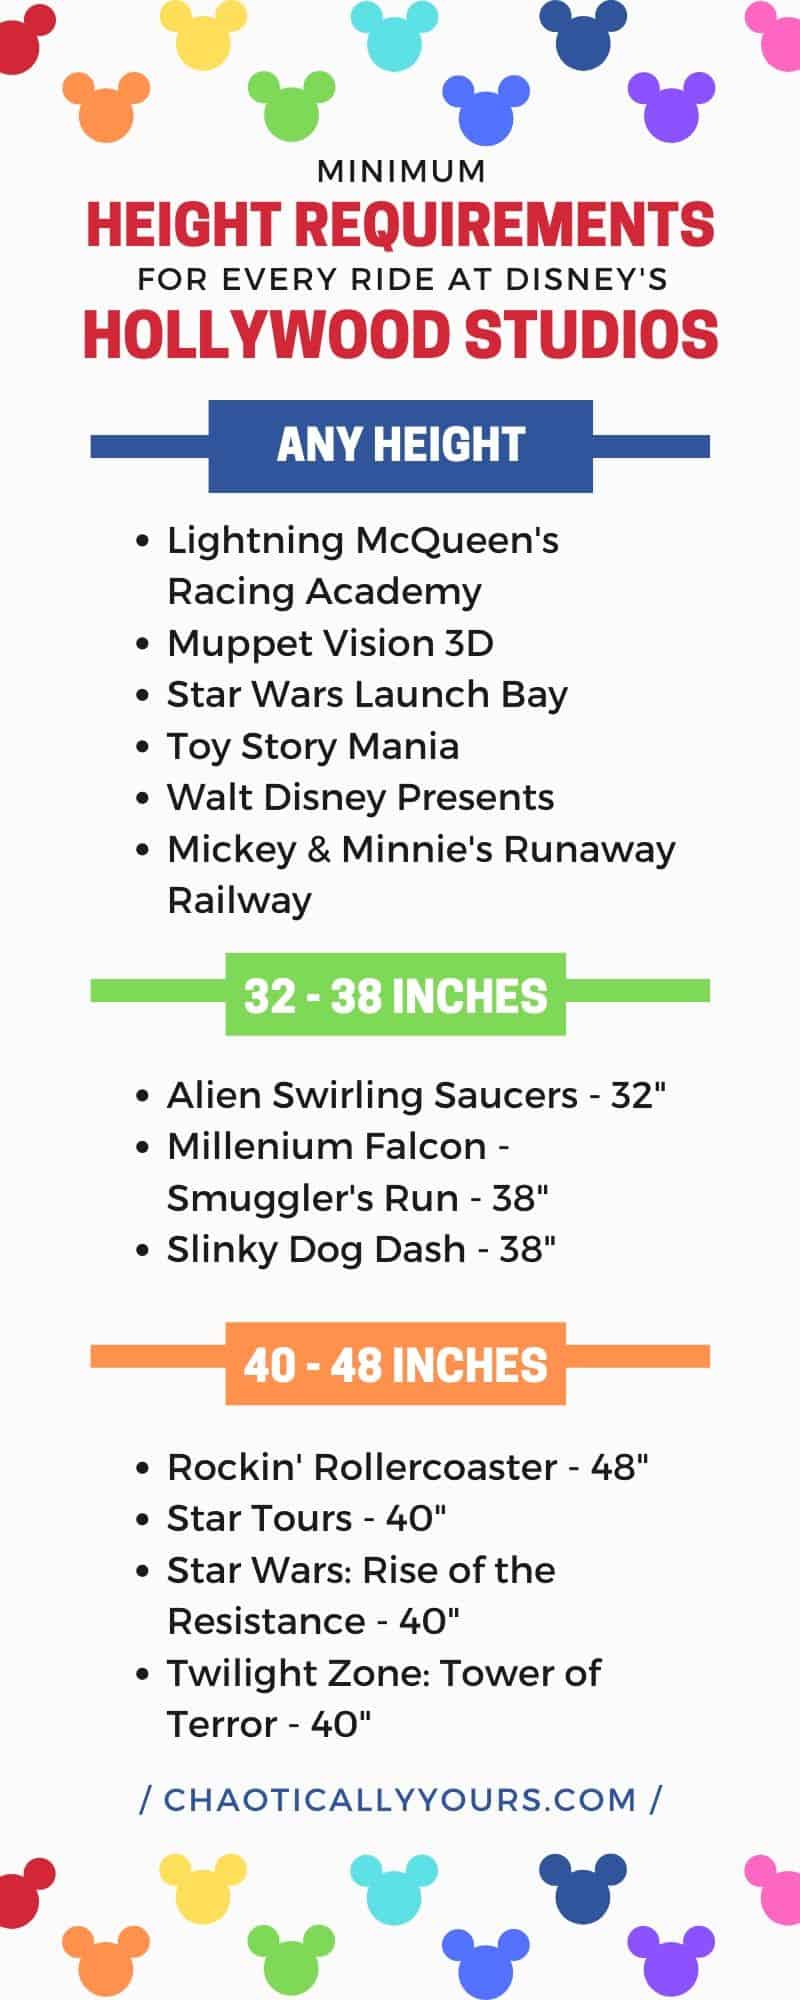 List of Disney Height Requirements for Rides in Hollywood Studios